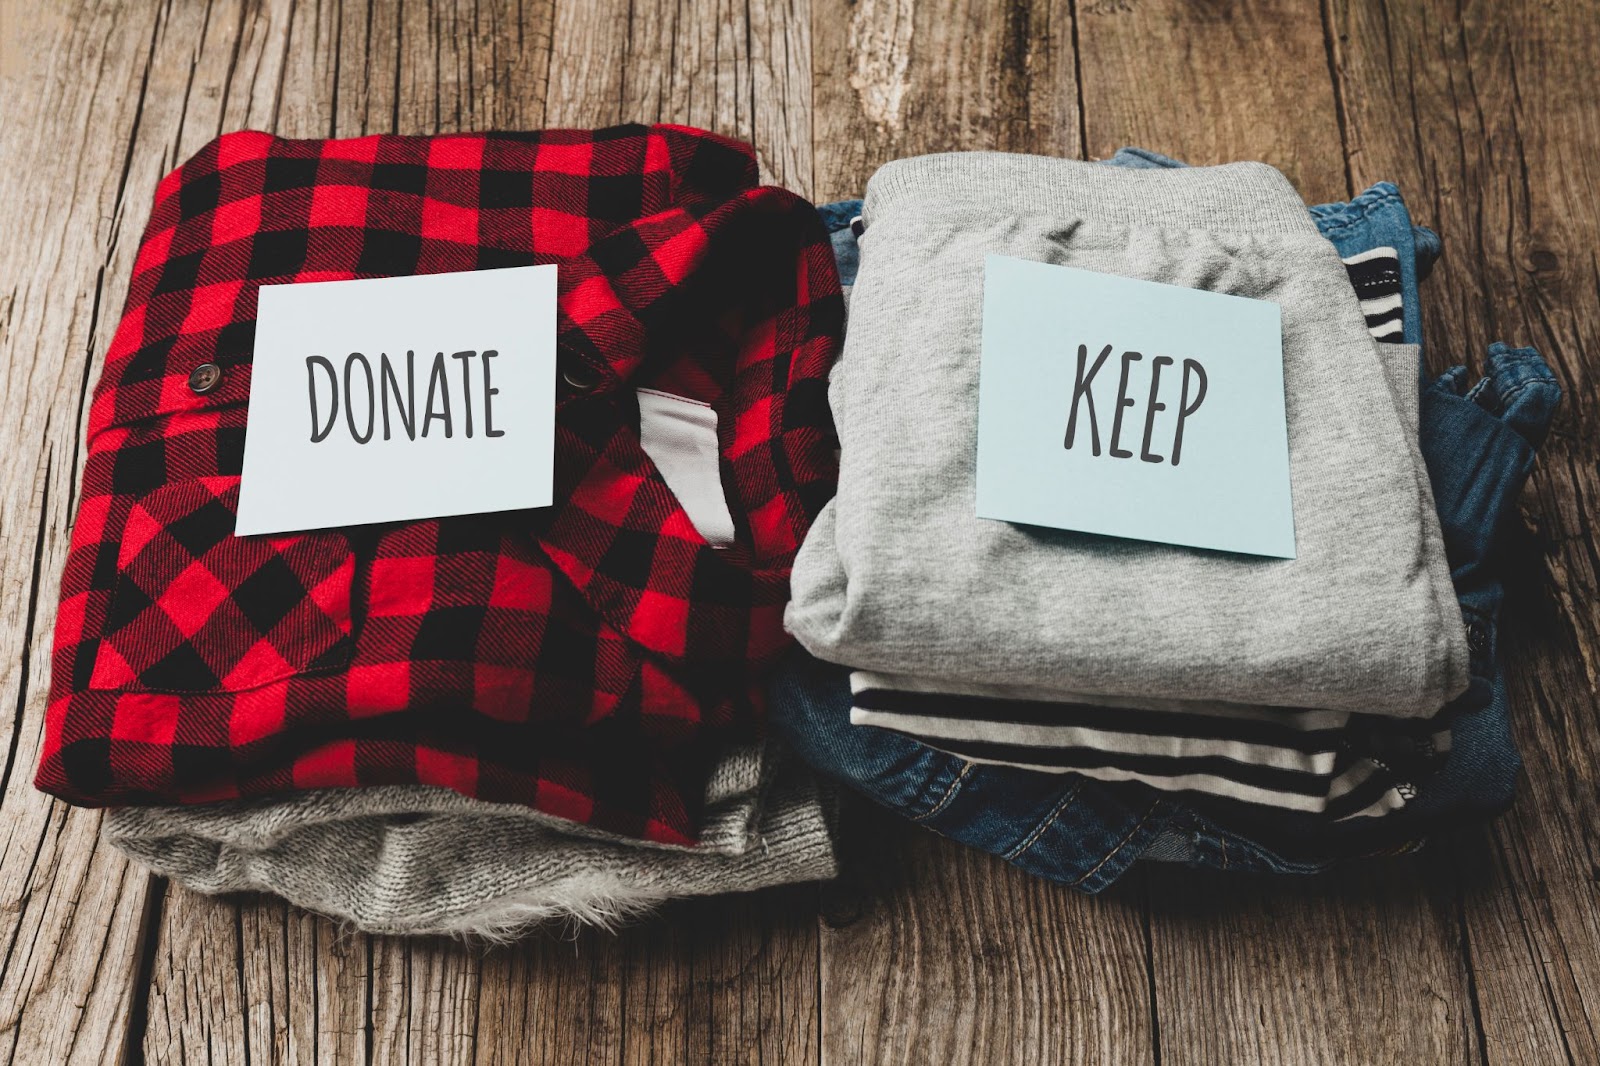 Clothes with donation and keep sign on wooden background